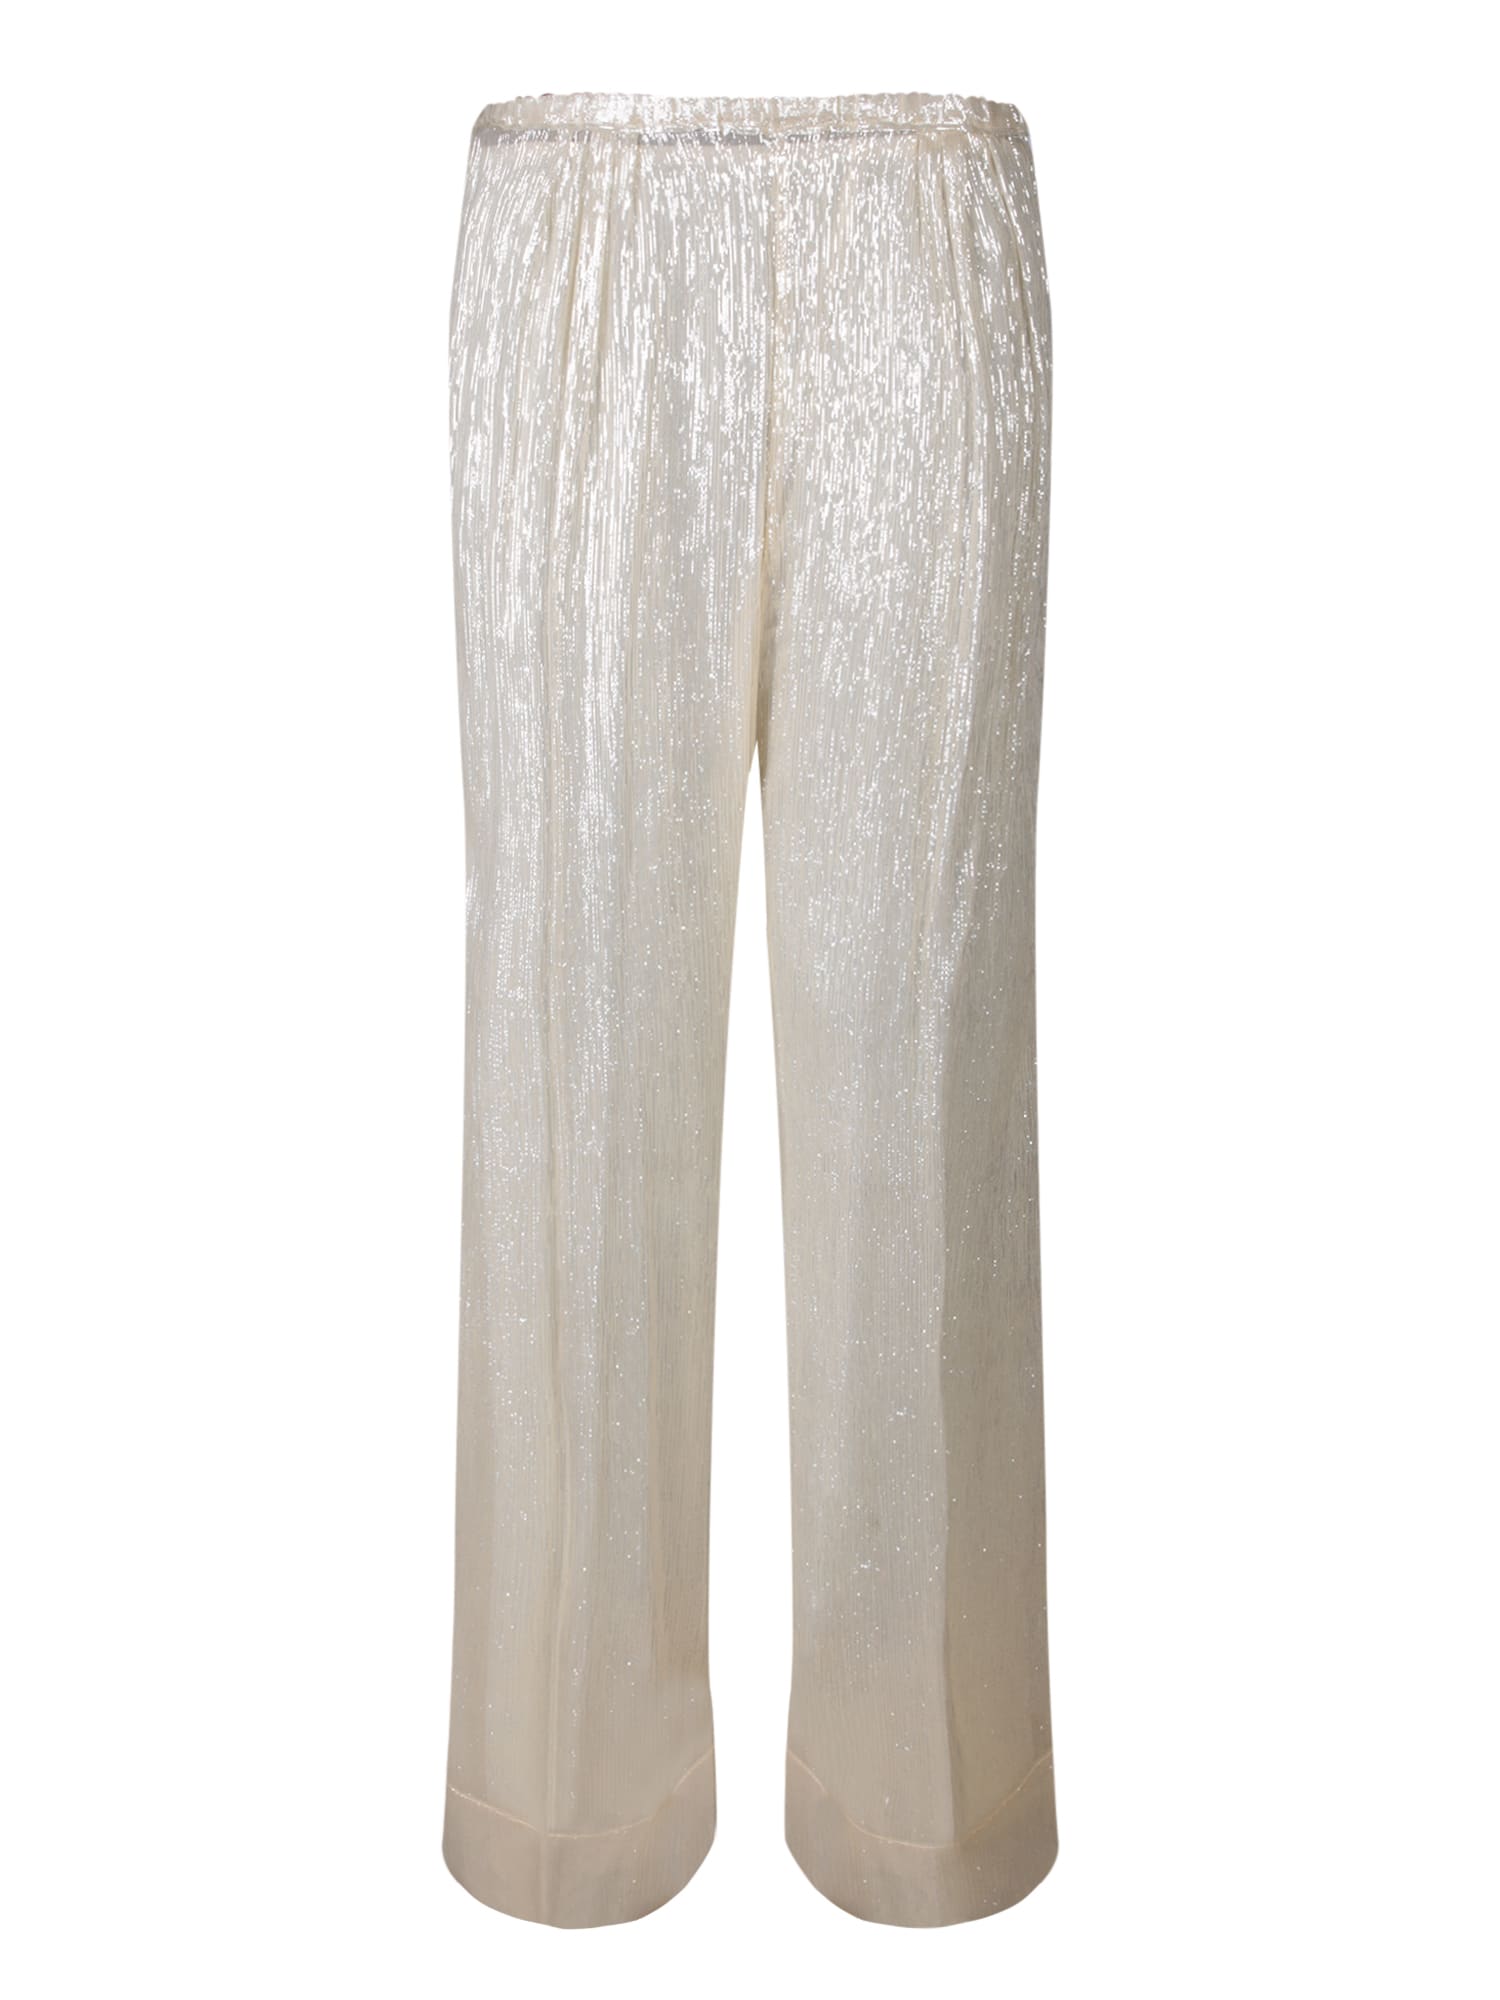 Forte_Forte Lurex Ivory Trousers